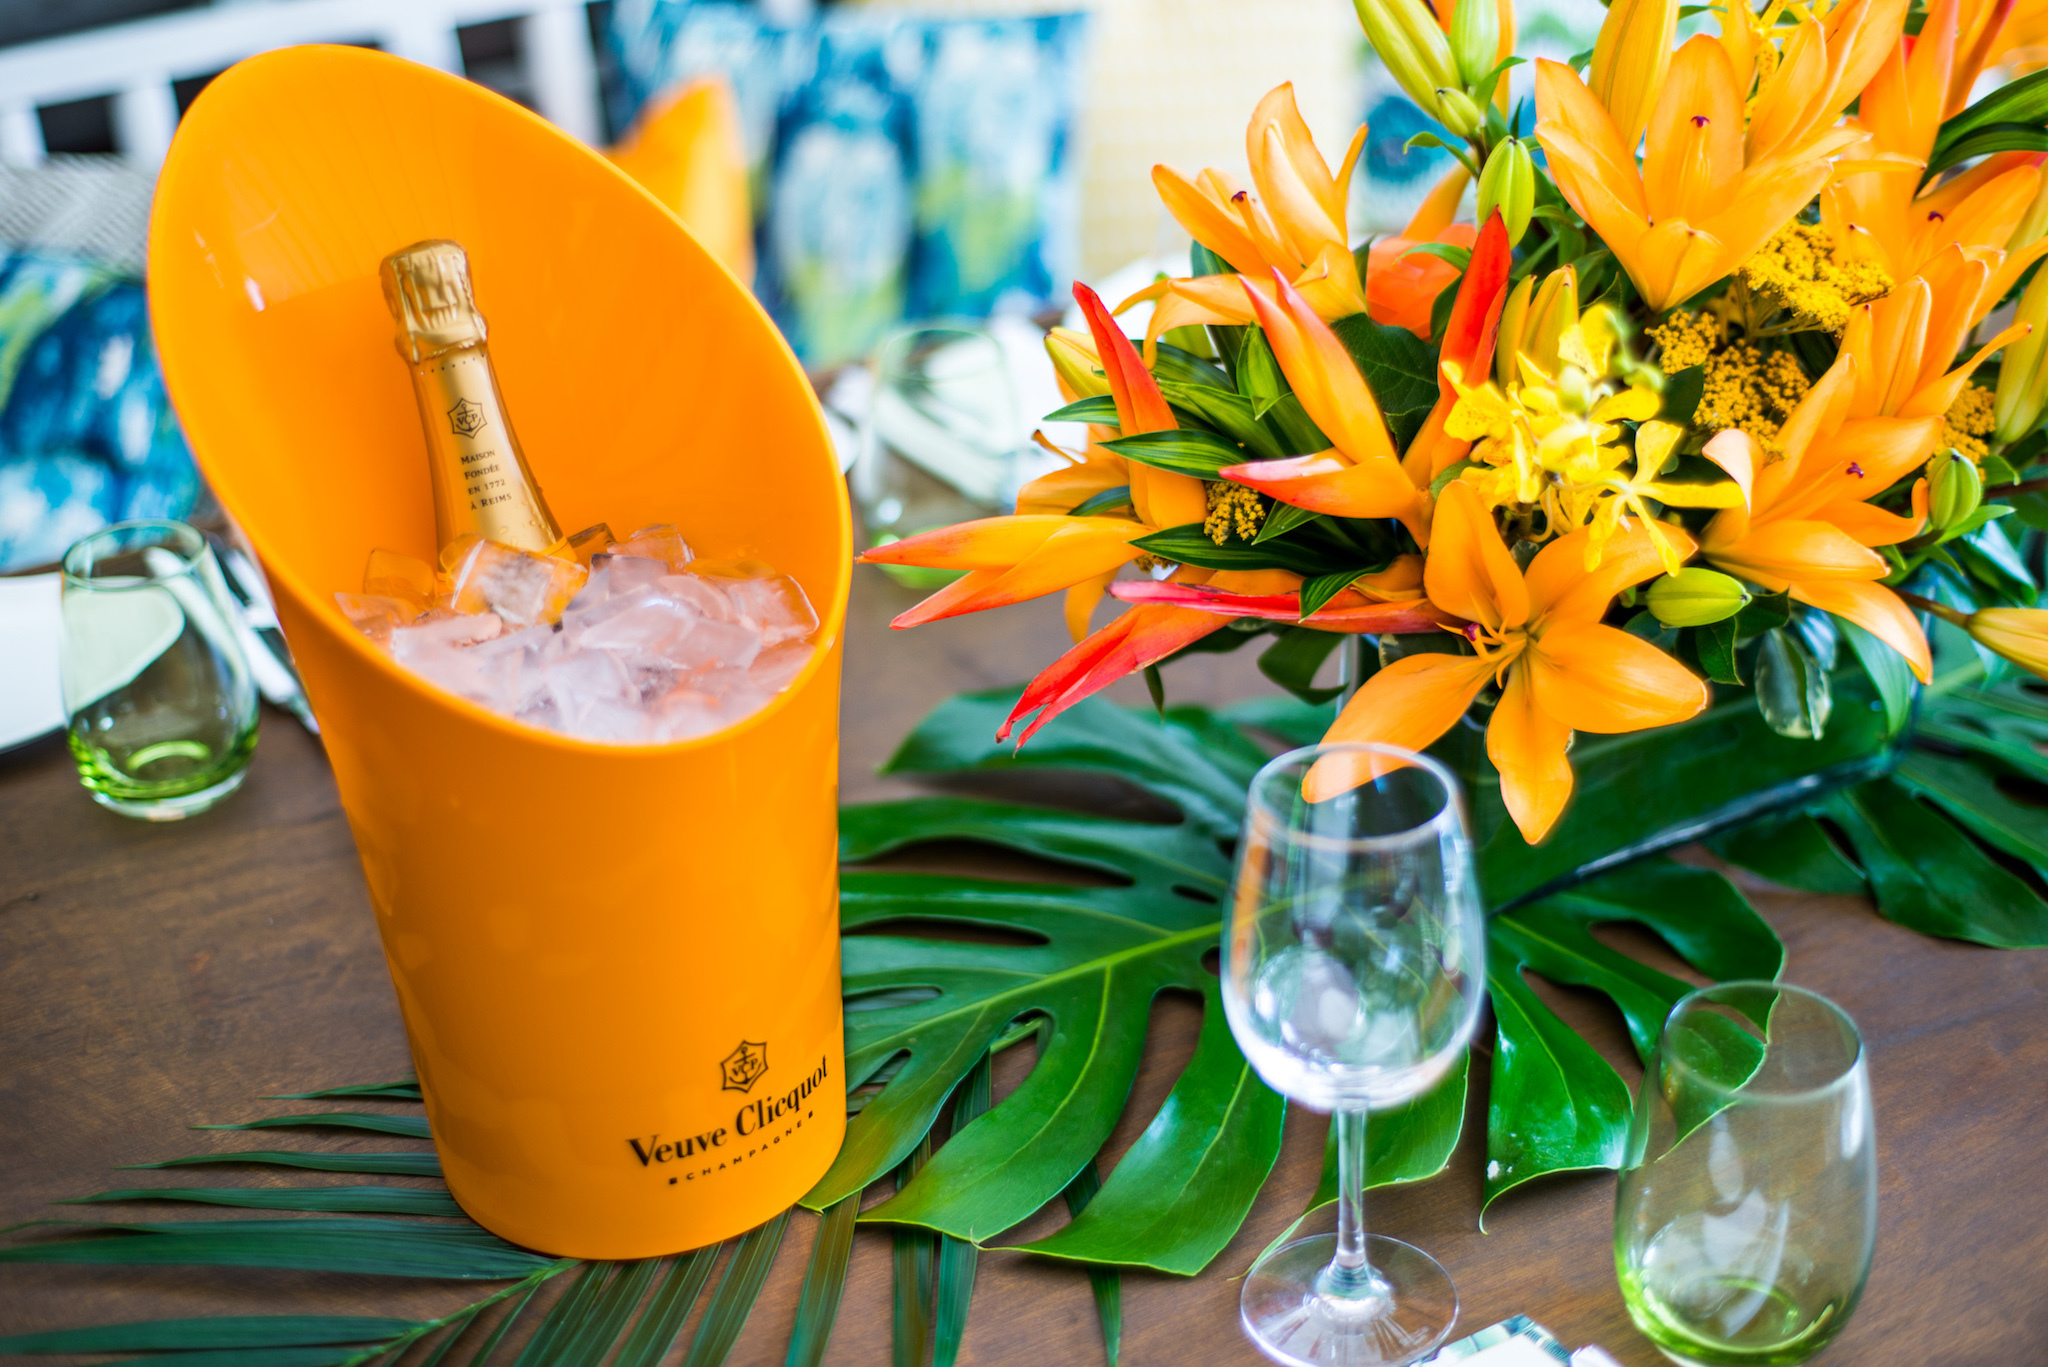 UPDATE: Veuve Clicquot's epic party weekend is postponed